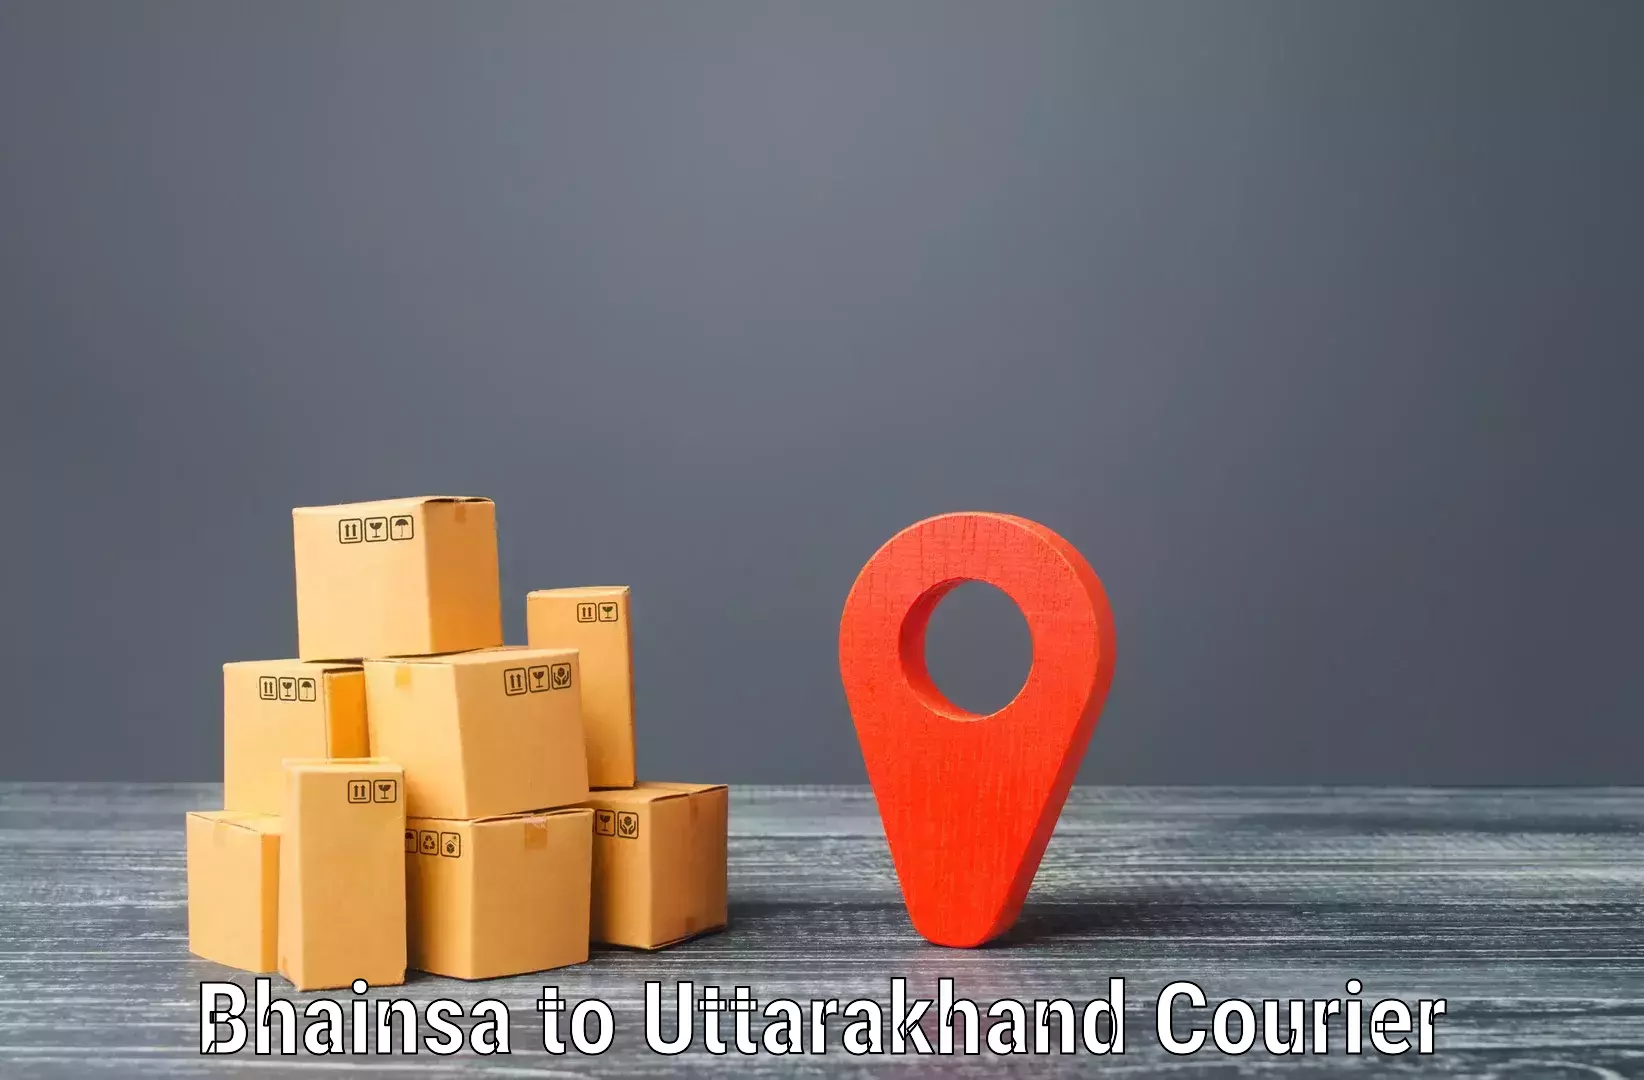 On-demand shipping options Bhainsa to Rudrapur